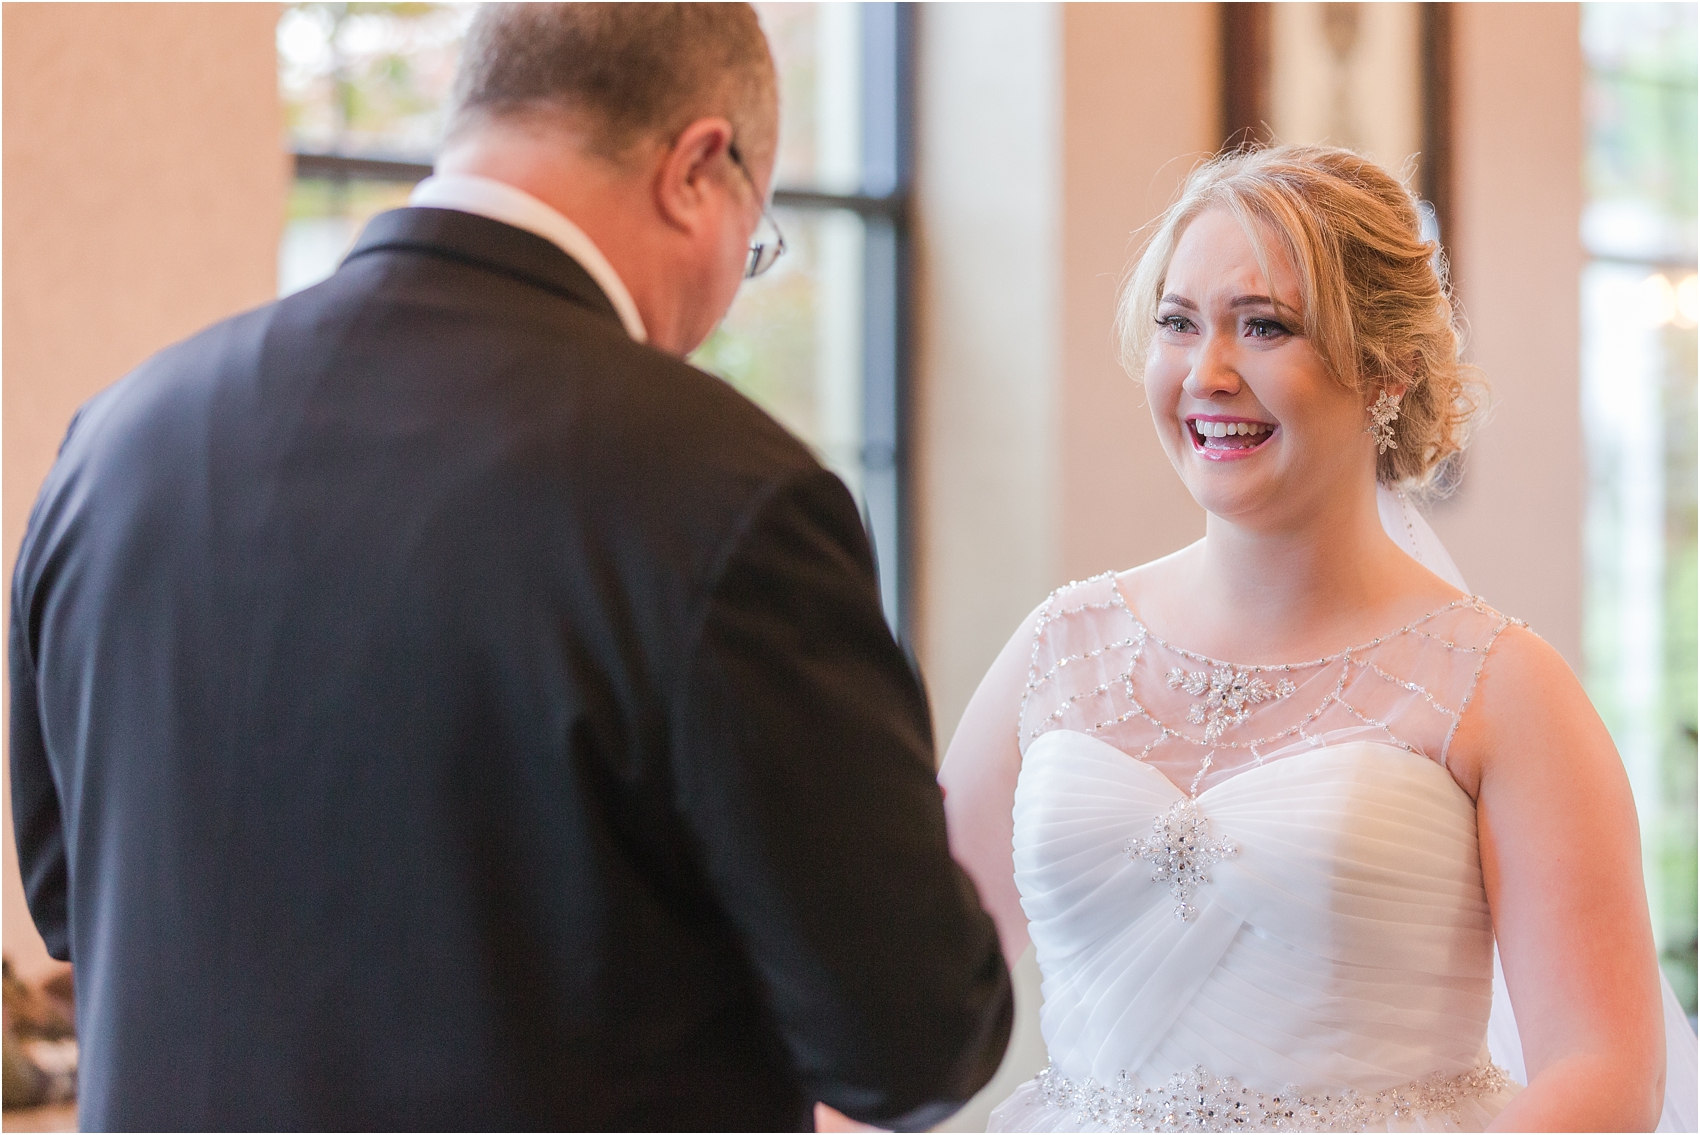 father-and-bride-share-emotional-first-look-on-wedding-day-photos-in-detroit-michigan-by-courtney-carolyn-photography_0005.jpg